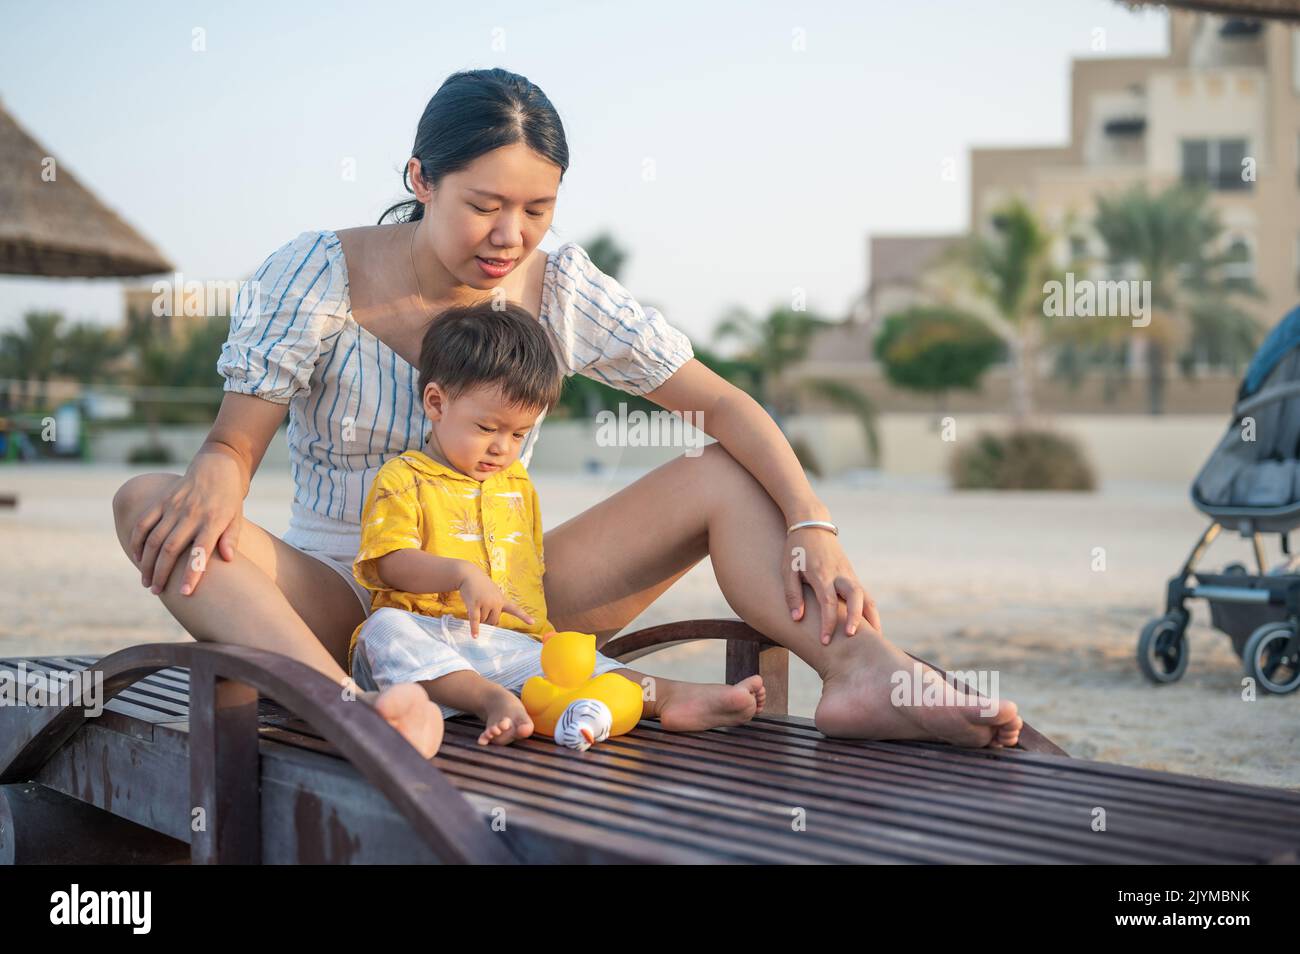 Baby boy on a beach holiday sitting on the sunbed with his mother and playing with toy duck. Asian woman and her one year old infant boy having fun on Stock Photo